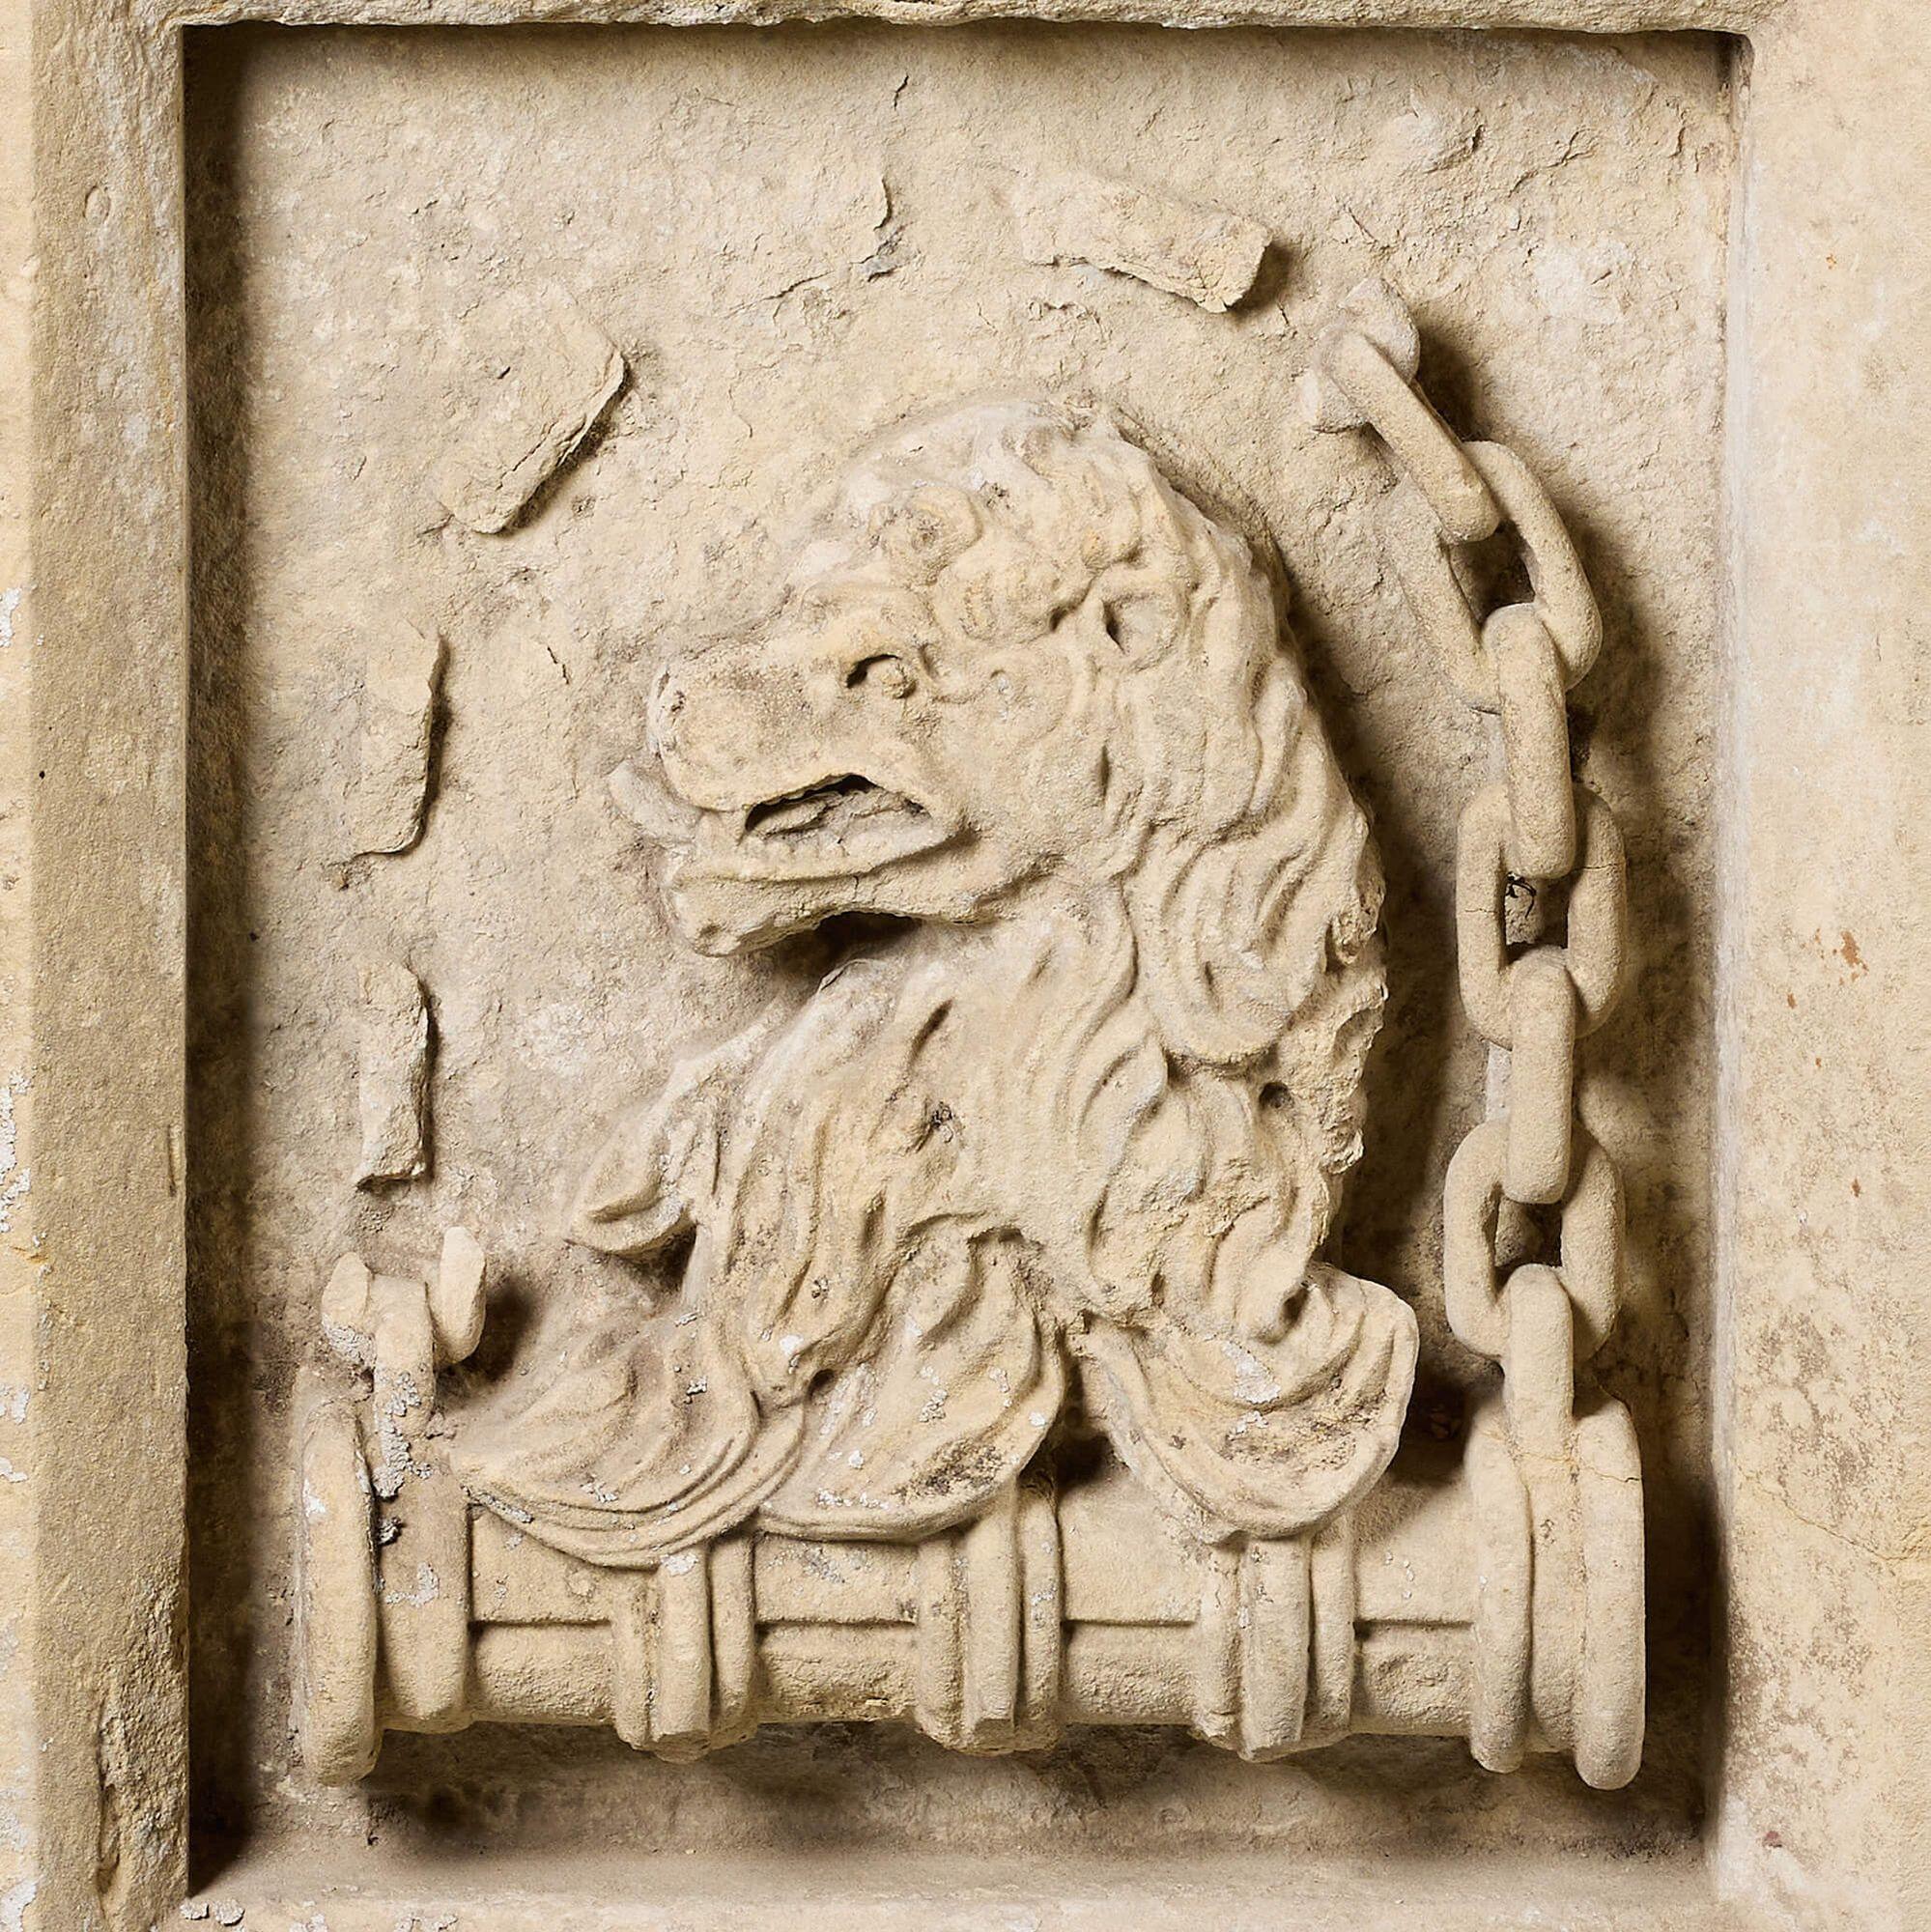 Dating from the 1850s, this carved limestone antique plaque depicts the head of a lion within hand carved chain links, some of which have been lost through the ages. It is more than 170 years old and likely once formed part of a larger piece